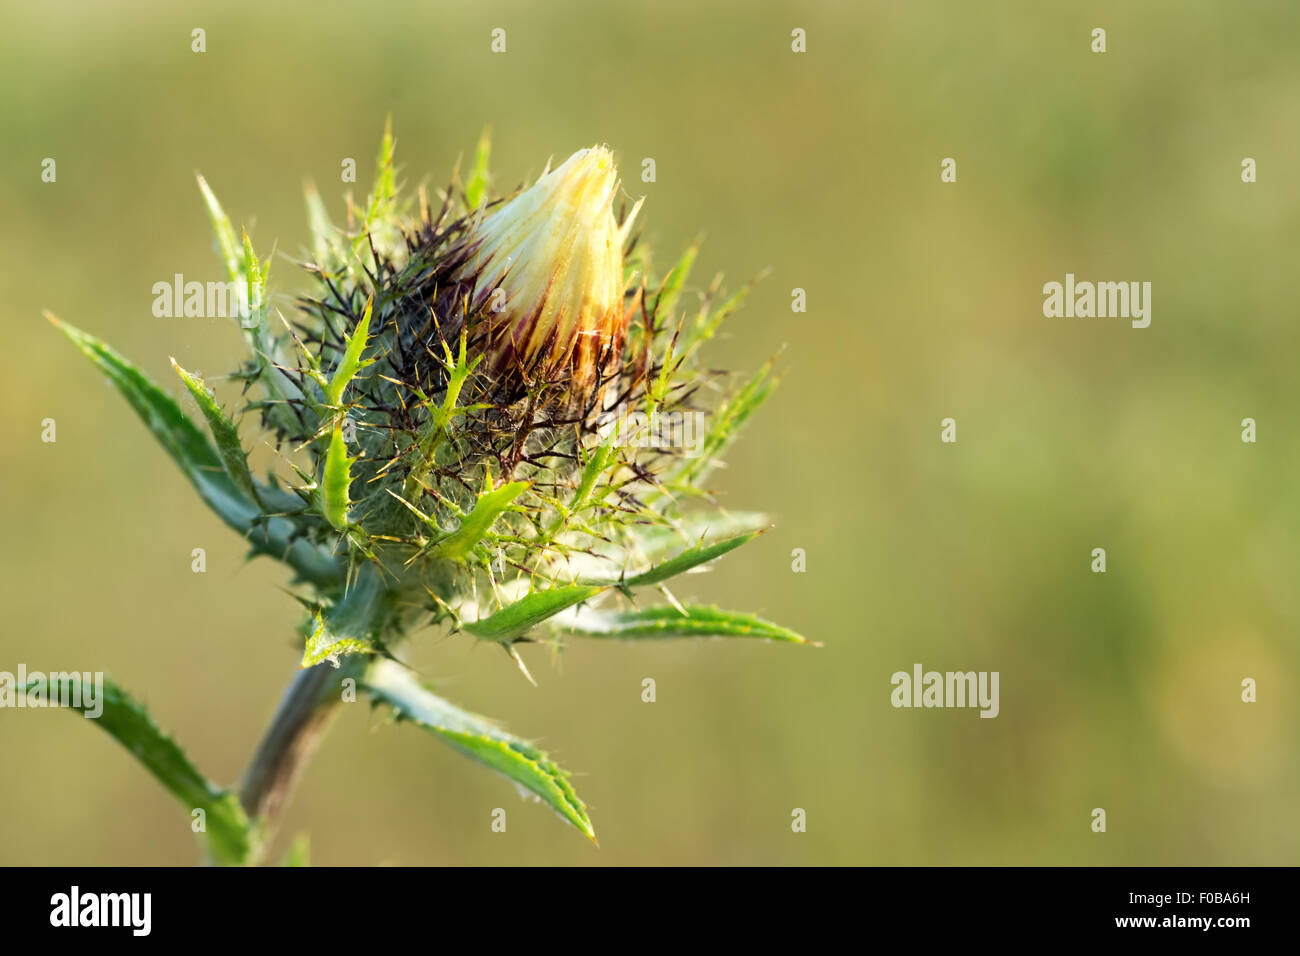 Bud Carline thistle (Carlina vulgaris) on a blurred background. Close-up. Stock Photo